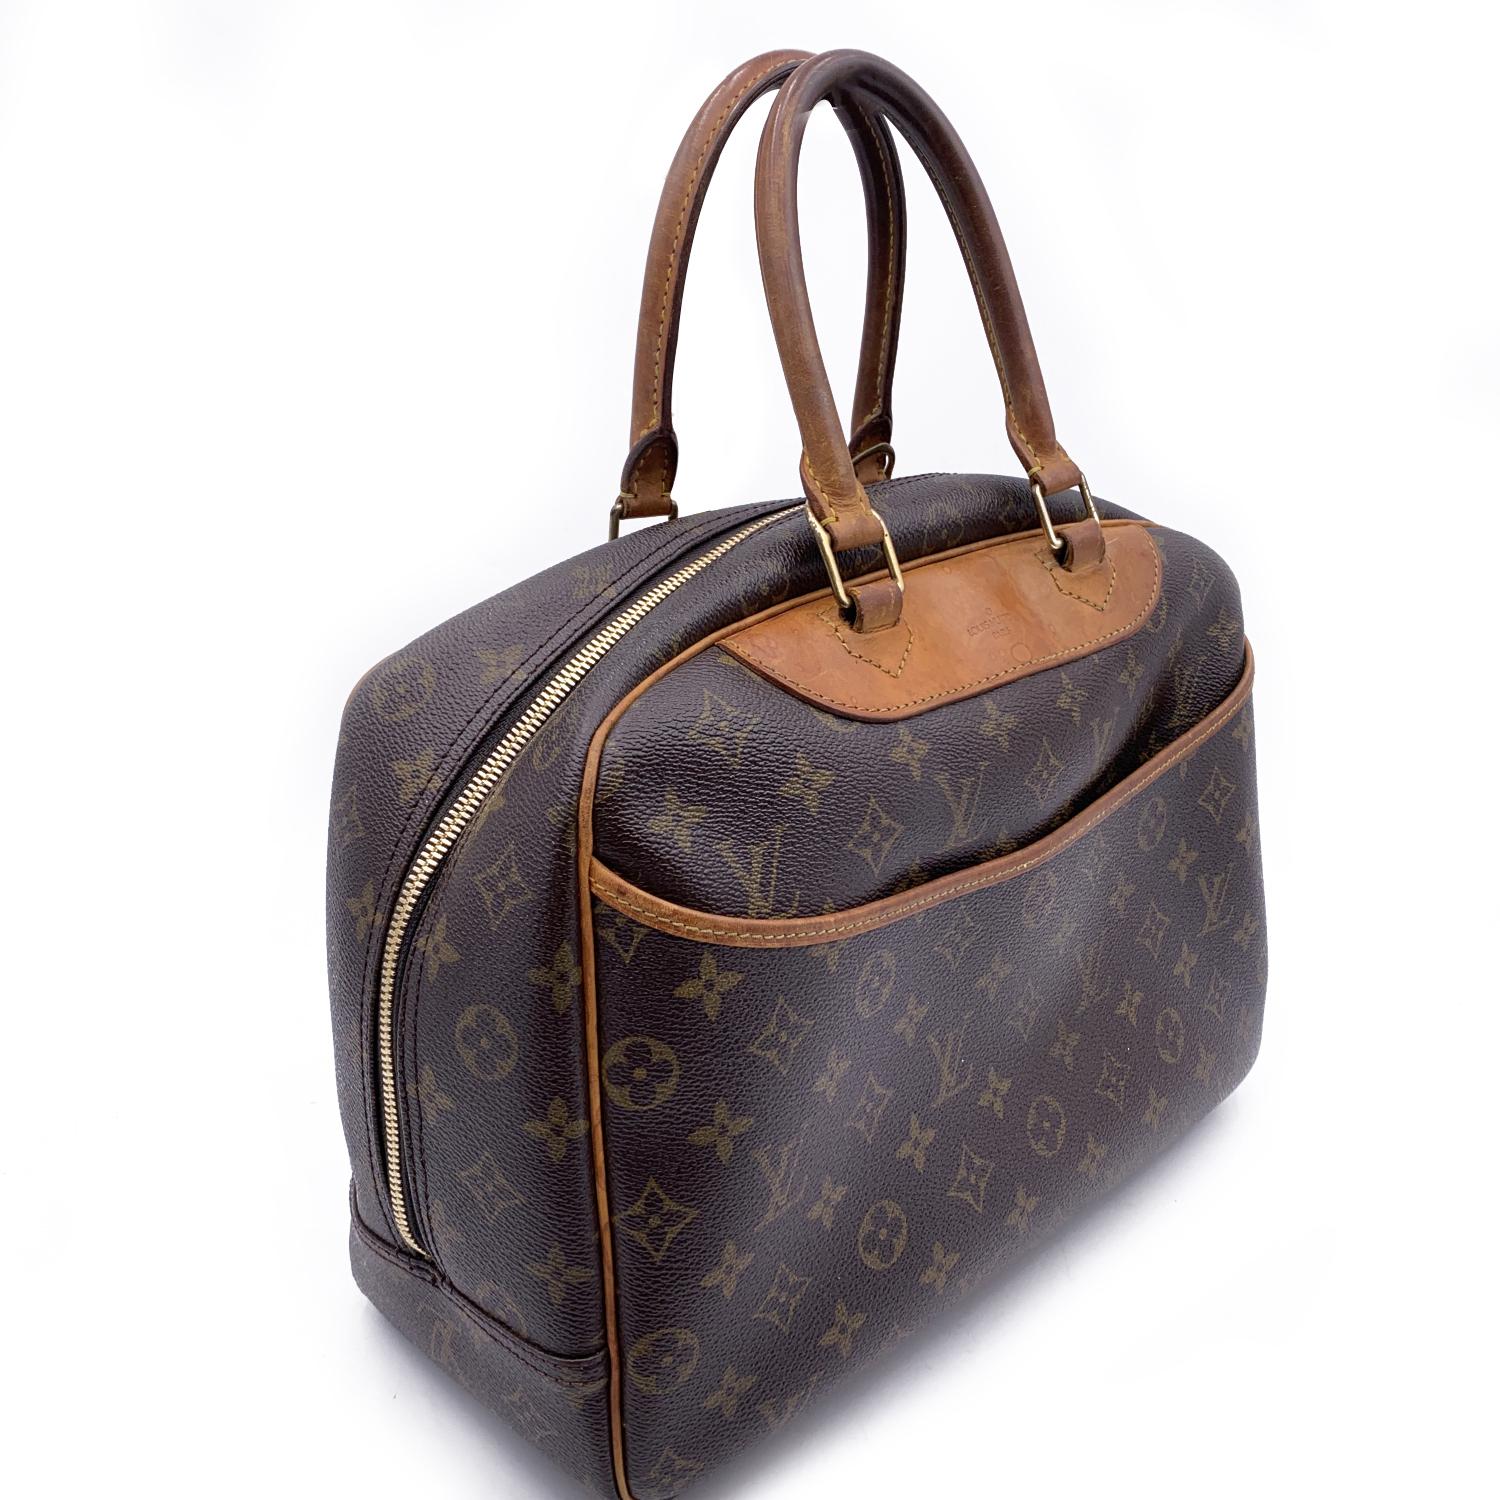 Louis Vuitton DEAUVILLE Bag crafted in timeless monogram canvas with genuine leather trim and handles. Upper zipper closure.1 exterior open pocket. Beige washable lining with 4 open pockets, 1 elastic strap to hold bottles and cosmetics inside.